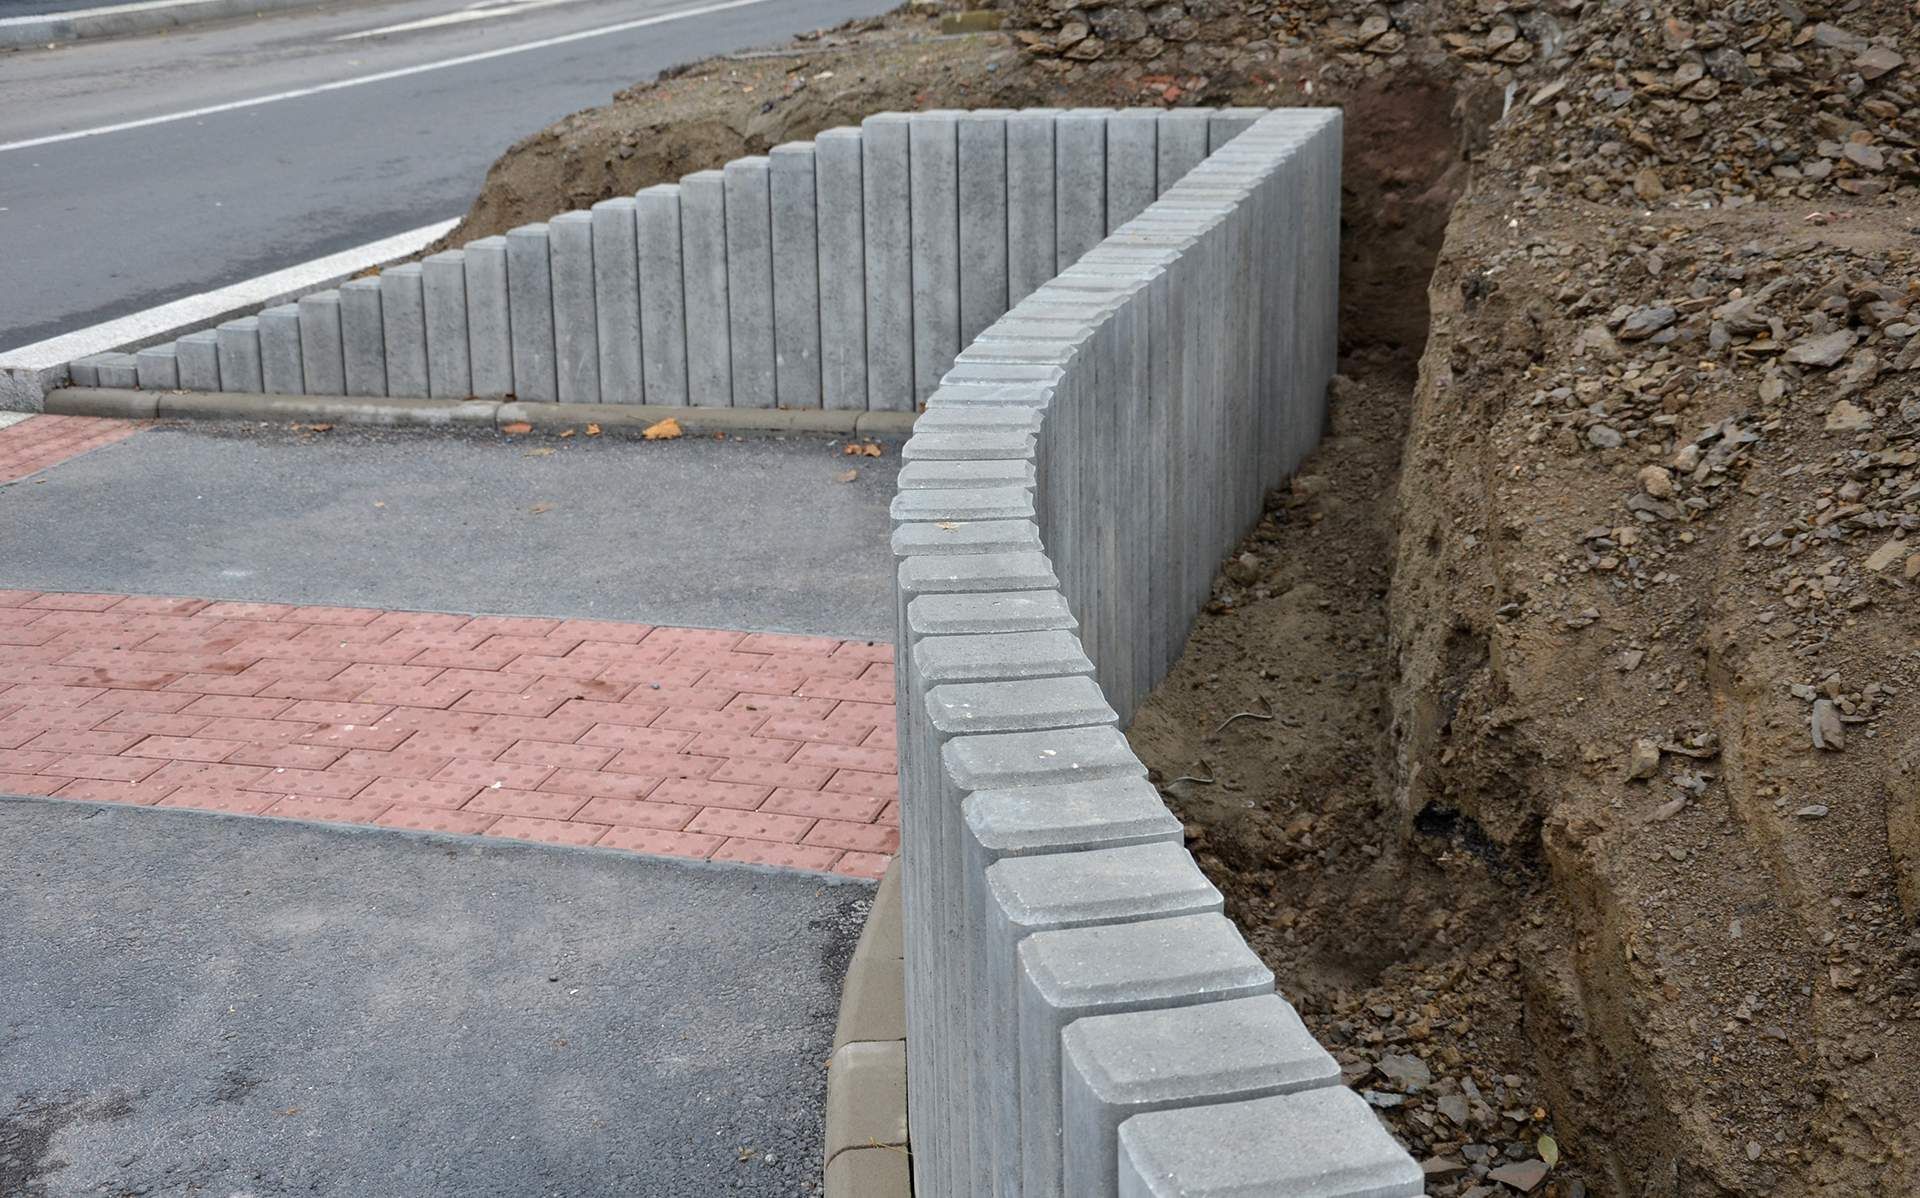 a concrete wall is being built next to a road